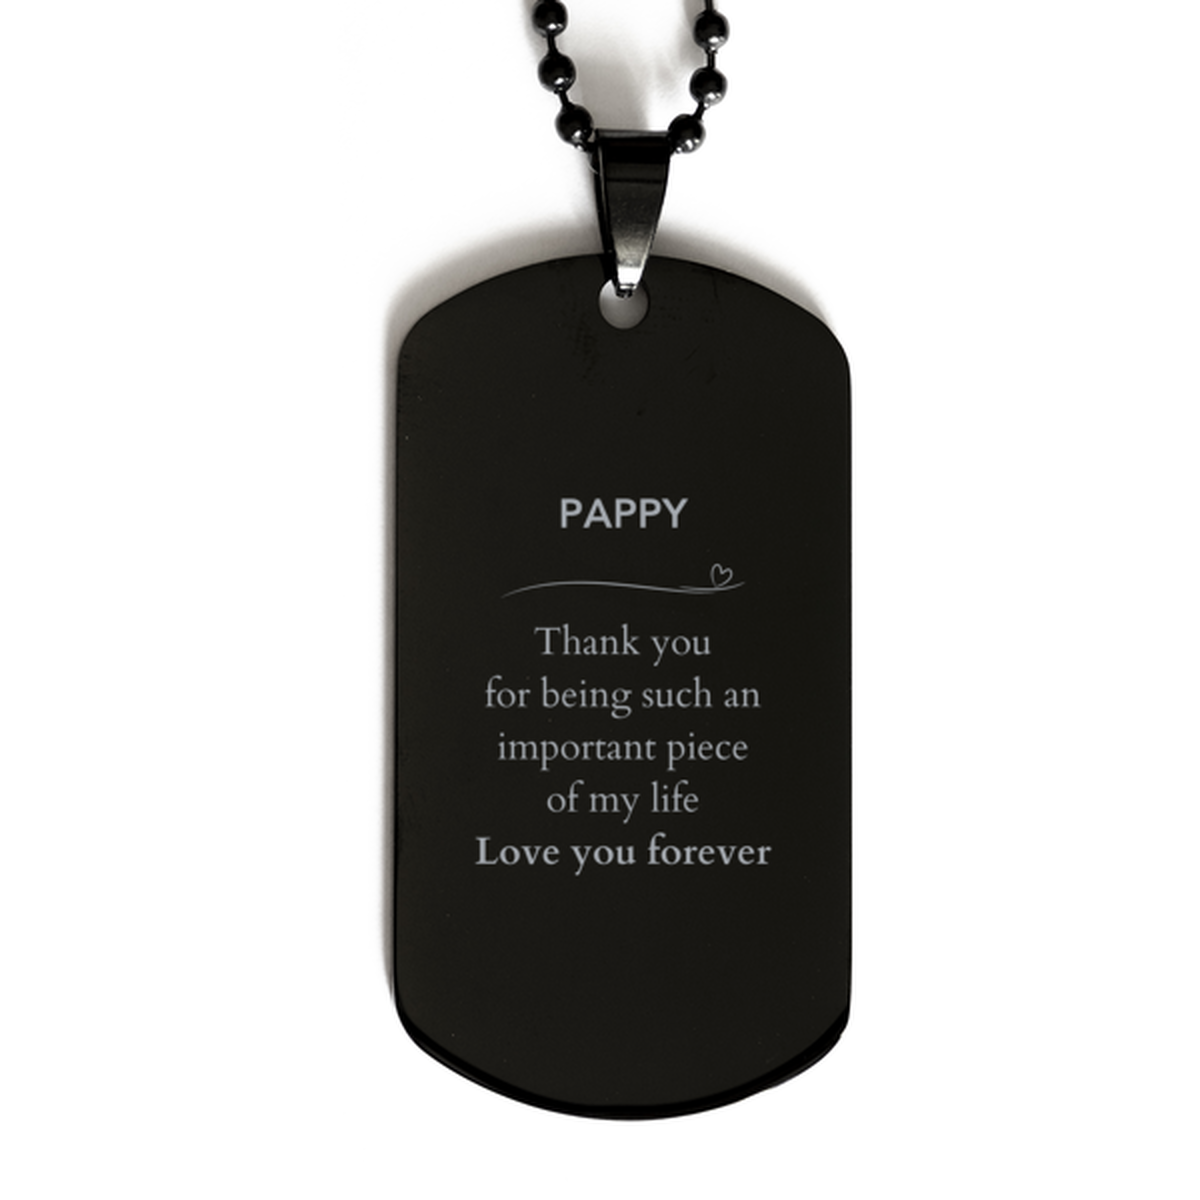 Appropriate Pappy Black Dog Tag Epic Birthday Gifts for Pappy Thank you for being such an important piece of my life Pappy Christmas Mothers Fathers Day